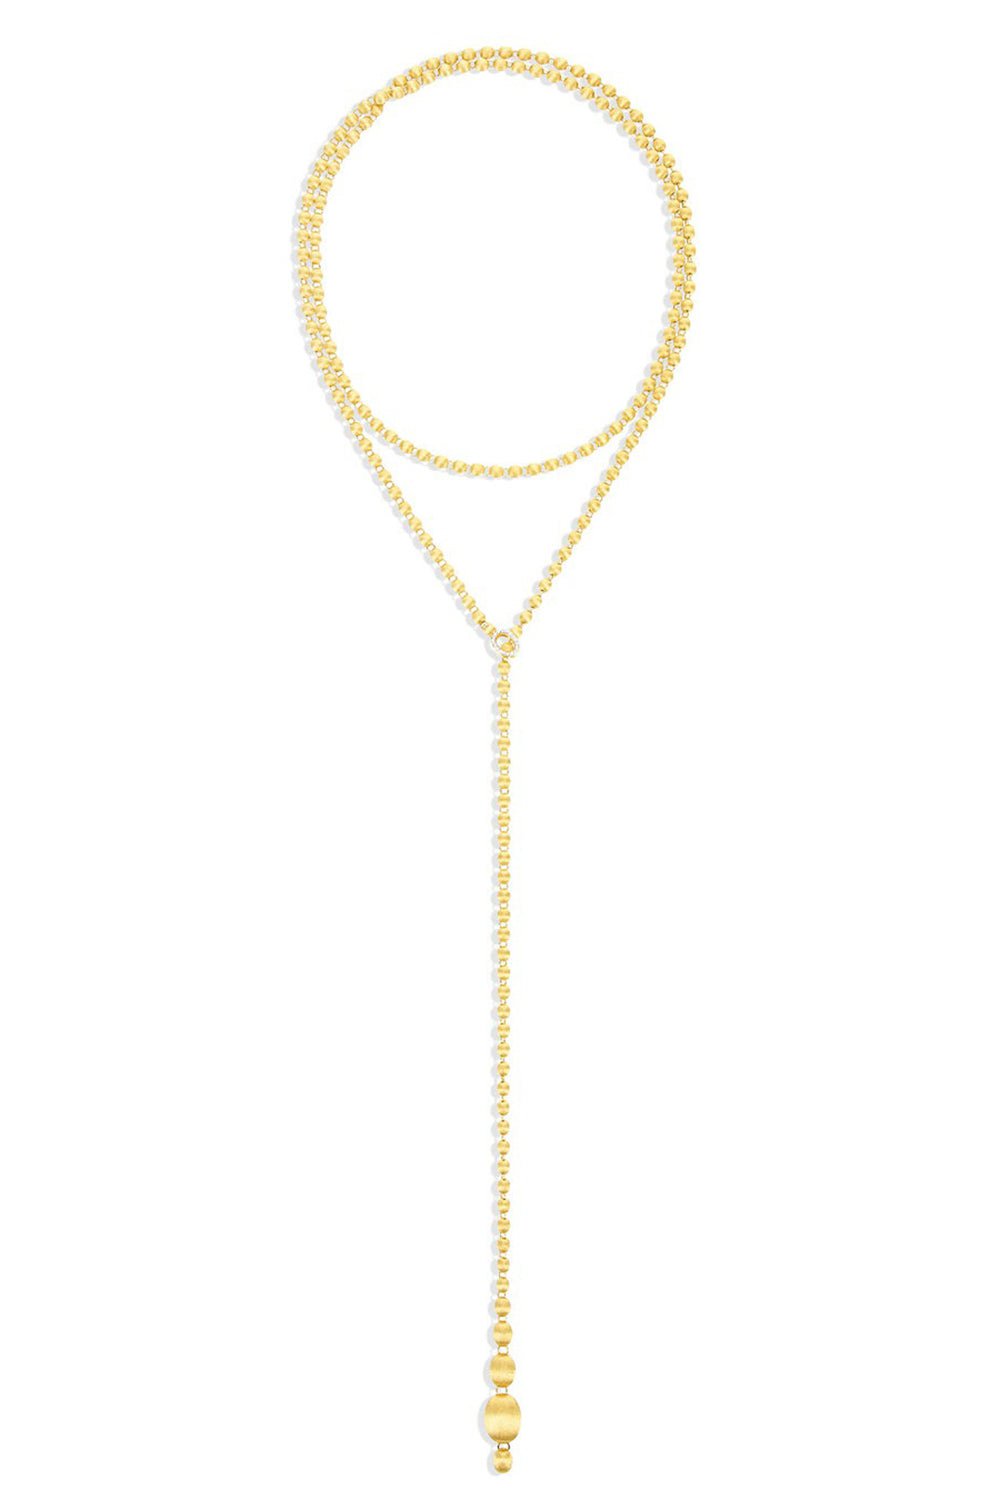 NANIS-Ivy Convertible Statement Necklace-YELLOW GOLD